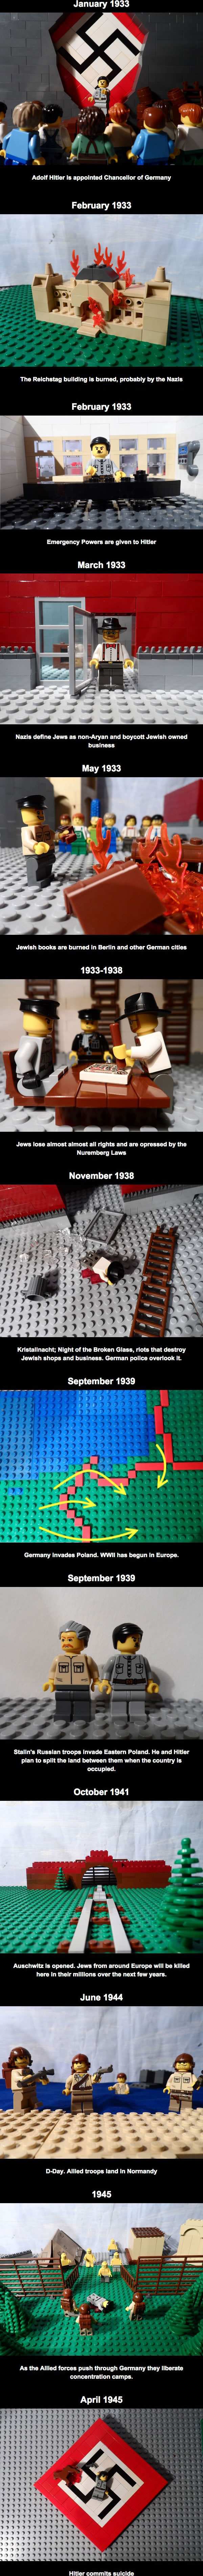 the history of nazi germany and hitler as told by legos